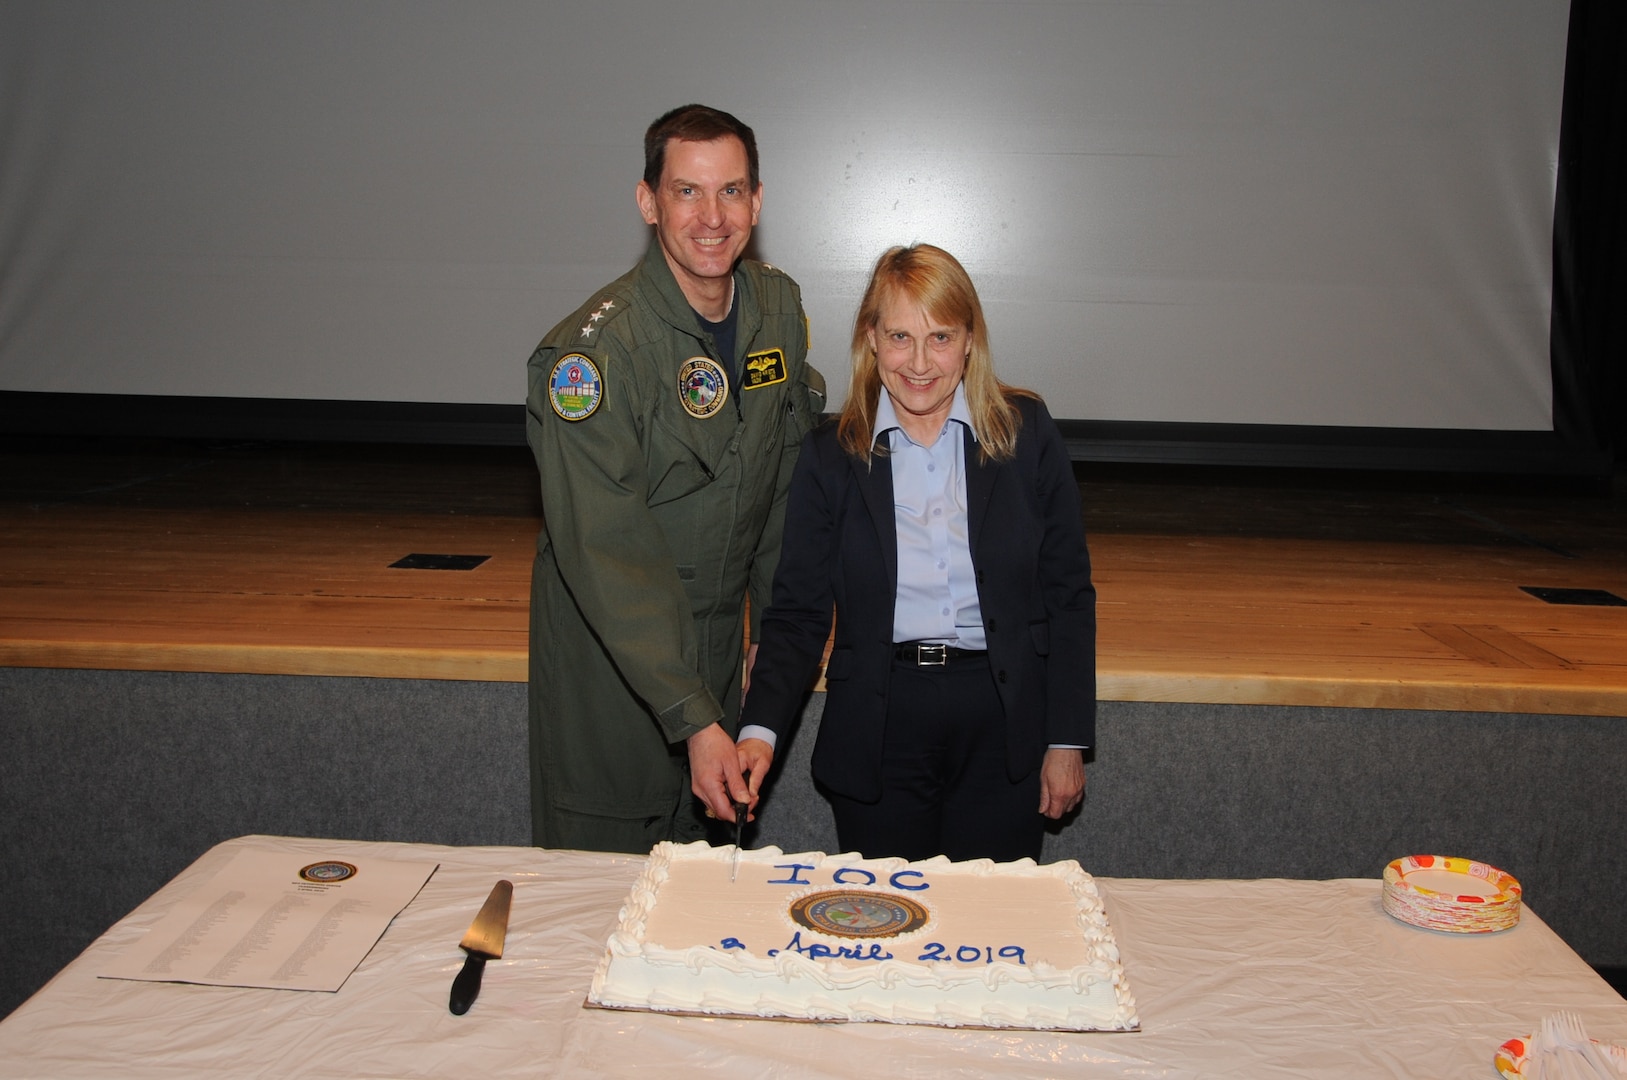 U.S. Navy Vice Adm. David Kriete, deputy commander of U.S. Strategic Command (USSTRATCOM), and Elizabeth Durham-Ruiz, director of USSTRATCOM Nuclear Command, Control and Communications (NC3) Enterprise Center, cut the cake following the announcement of USSTRATCOM’s Nuclear Command, Control and Communications Enterprise Center (NEC) meeting all requirements declaring initial operational capability at Offutt Air Force, Neb., April 3, 2019.